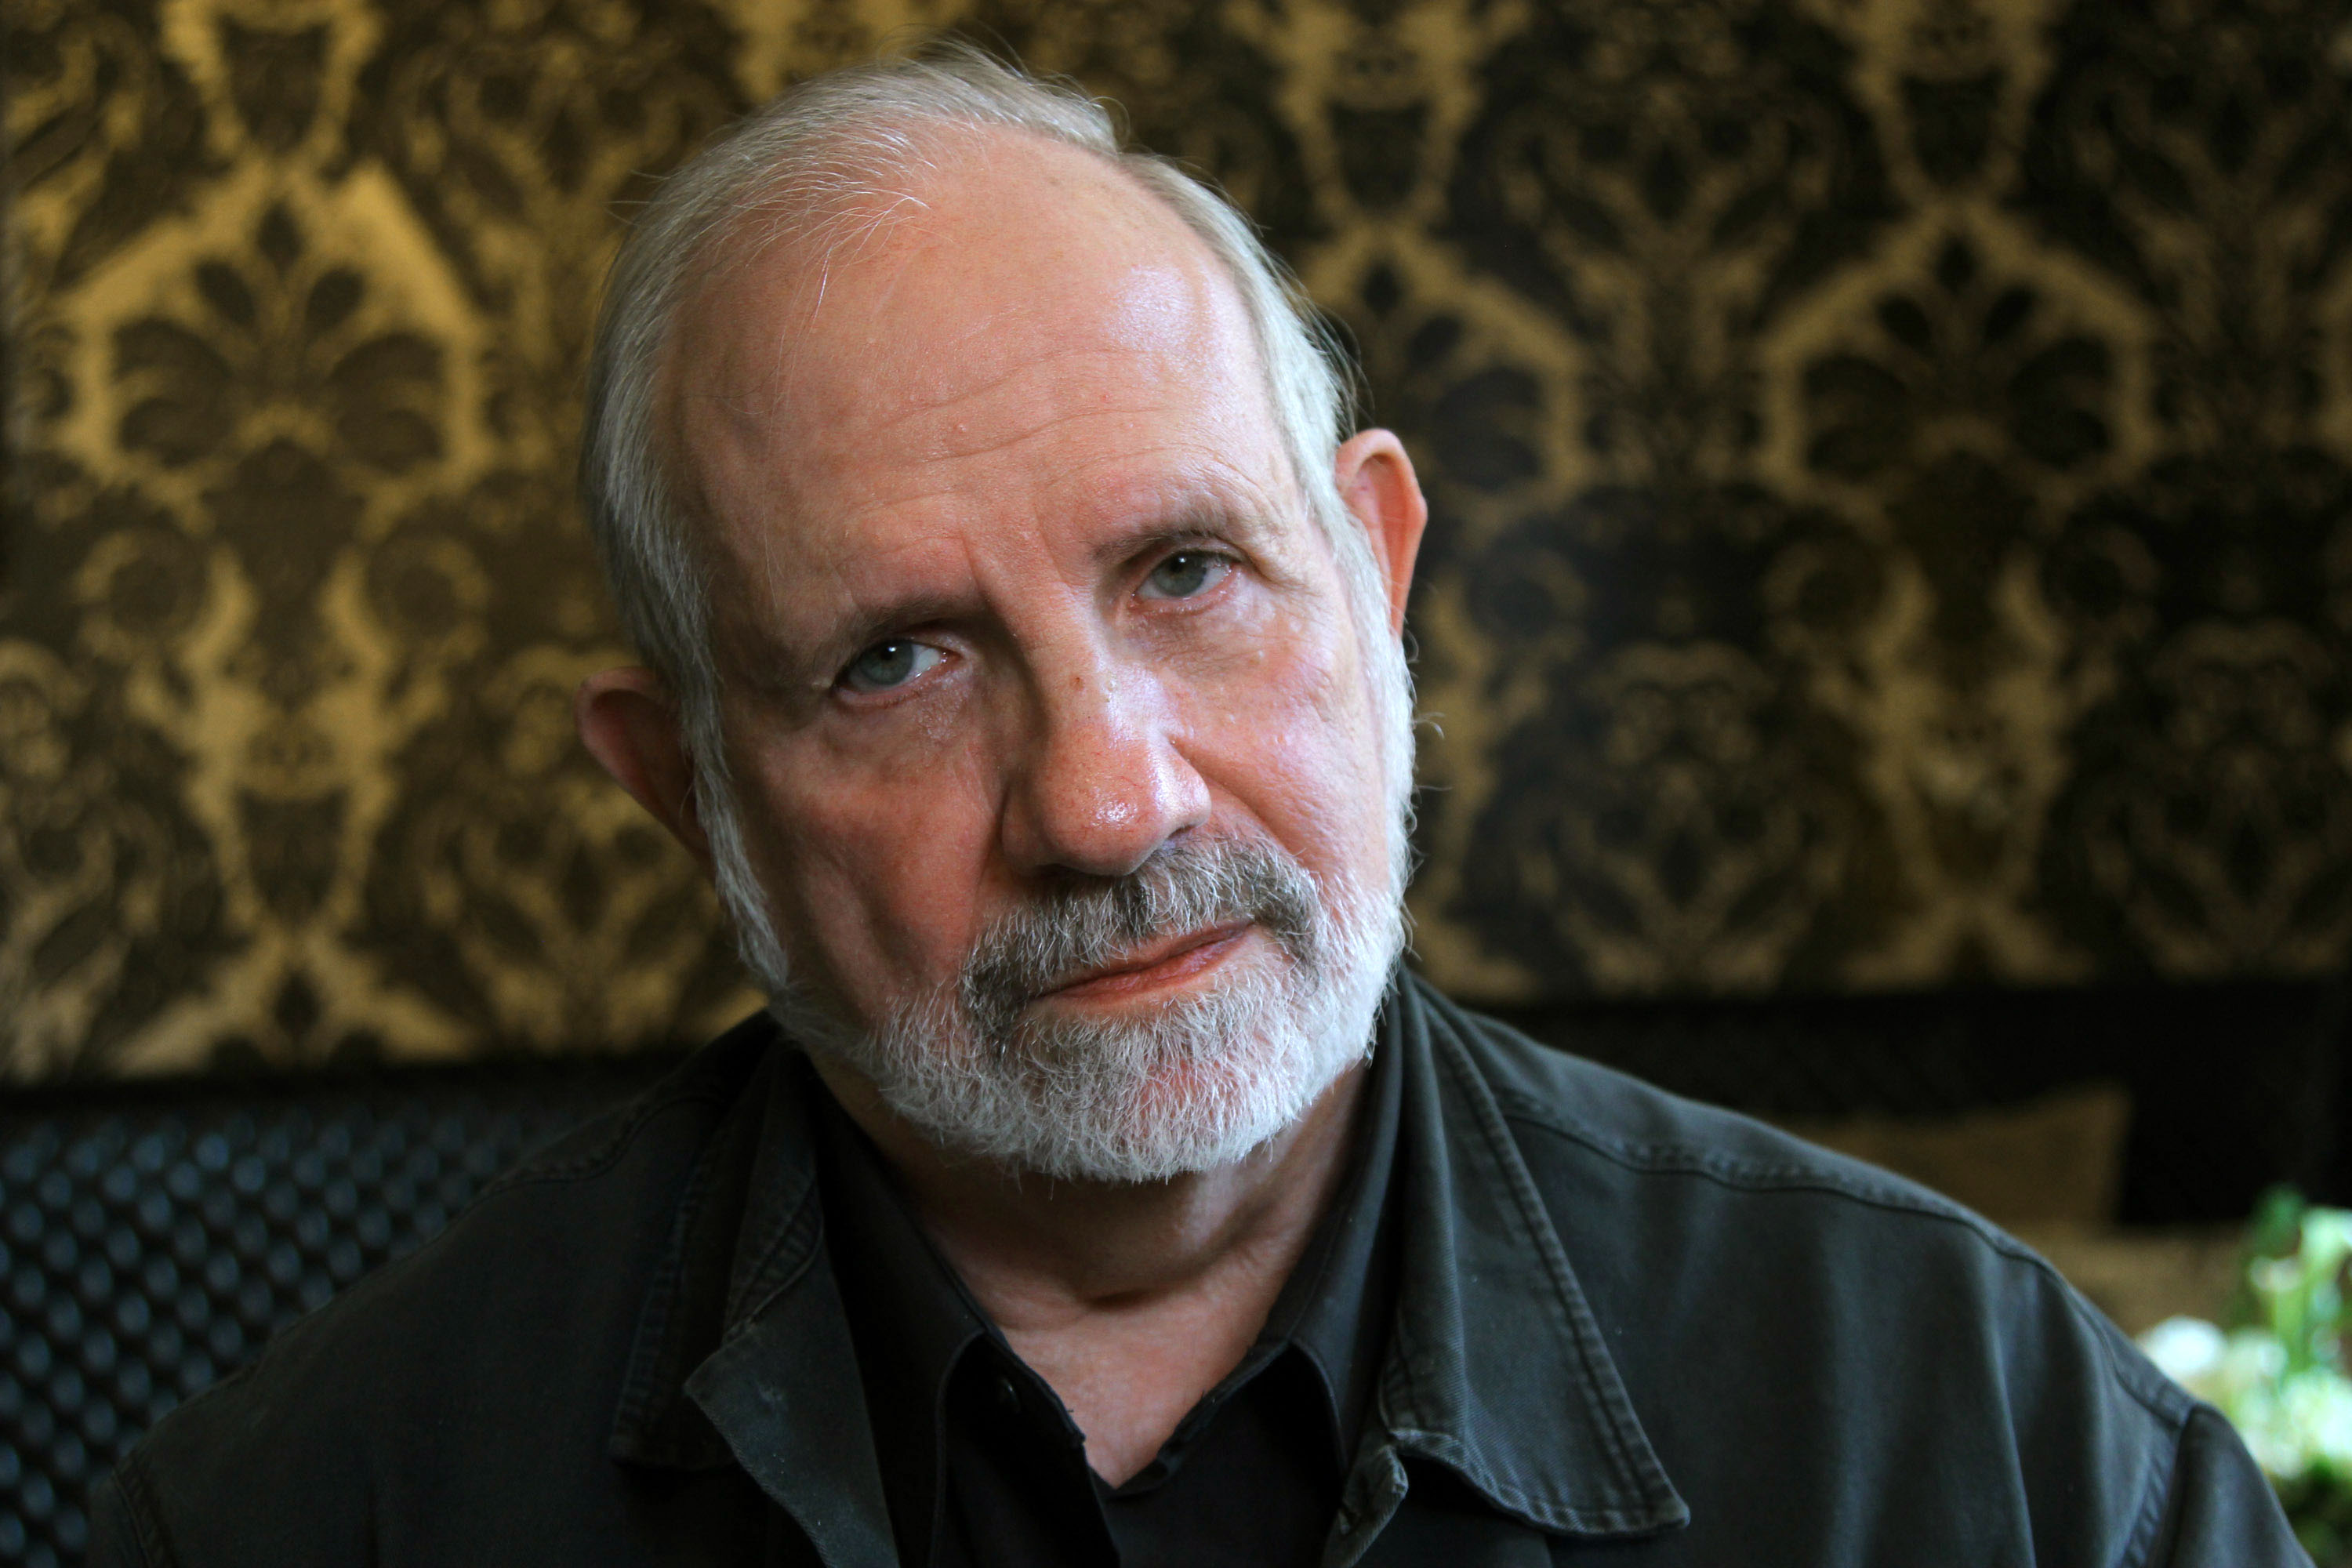 From ‘Carrie’ to ‘Scarface,’ new documentary ‘De Palma’ makes the case for Brian De Palma